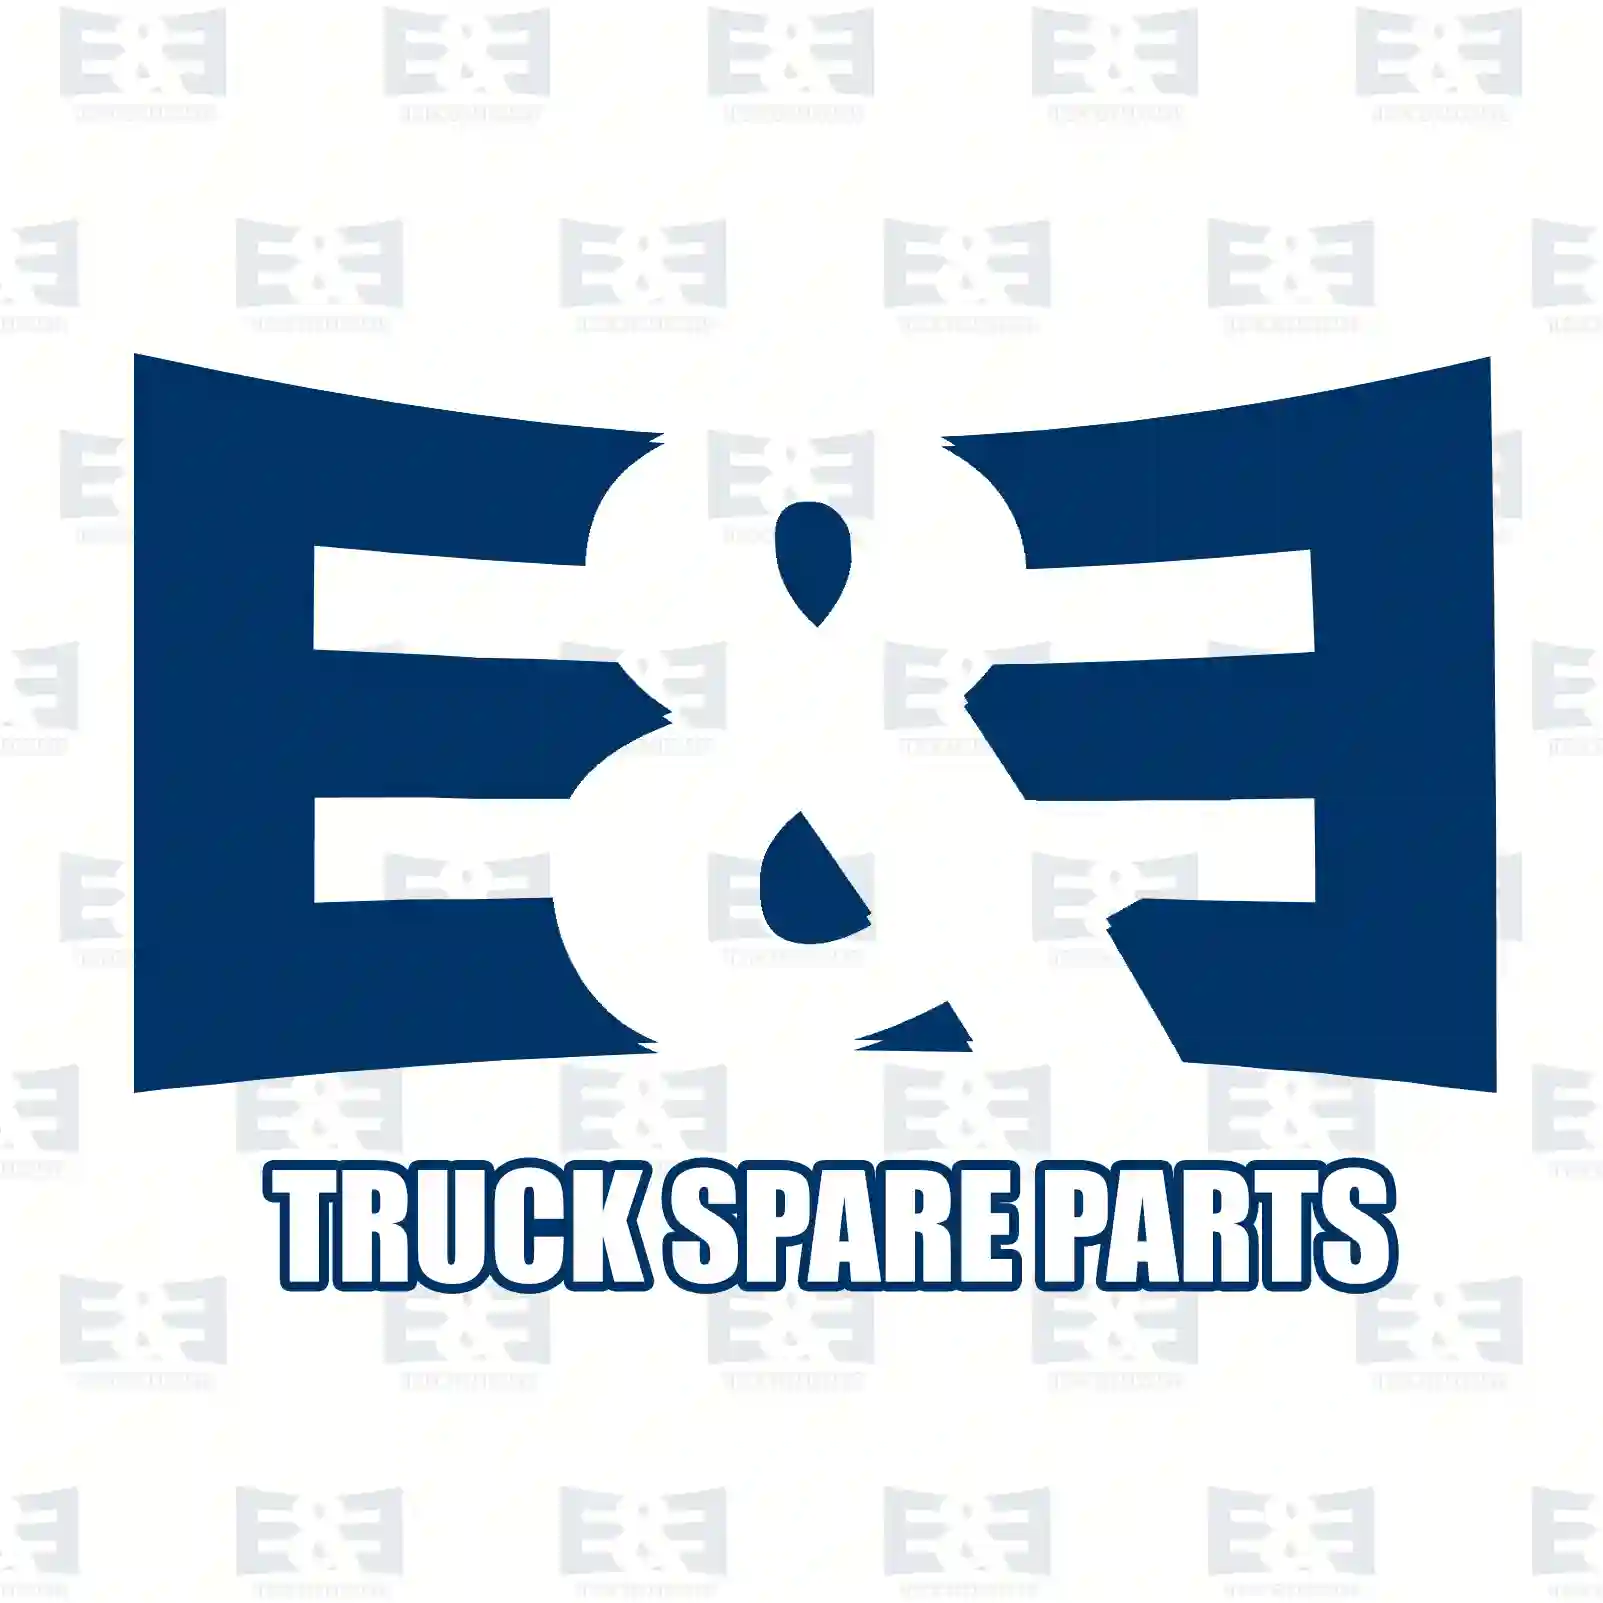  Mounting kit, link yoke, brake cylinder || E&E Truck Spare Parts | Truck Spare Parts, Auotomotive Spare Parts